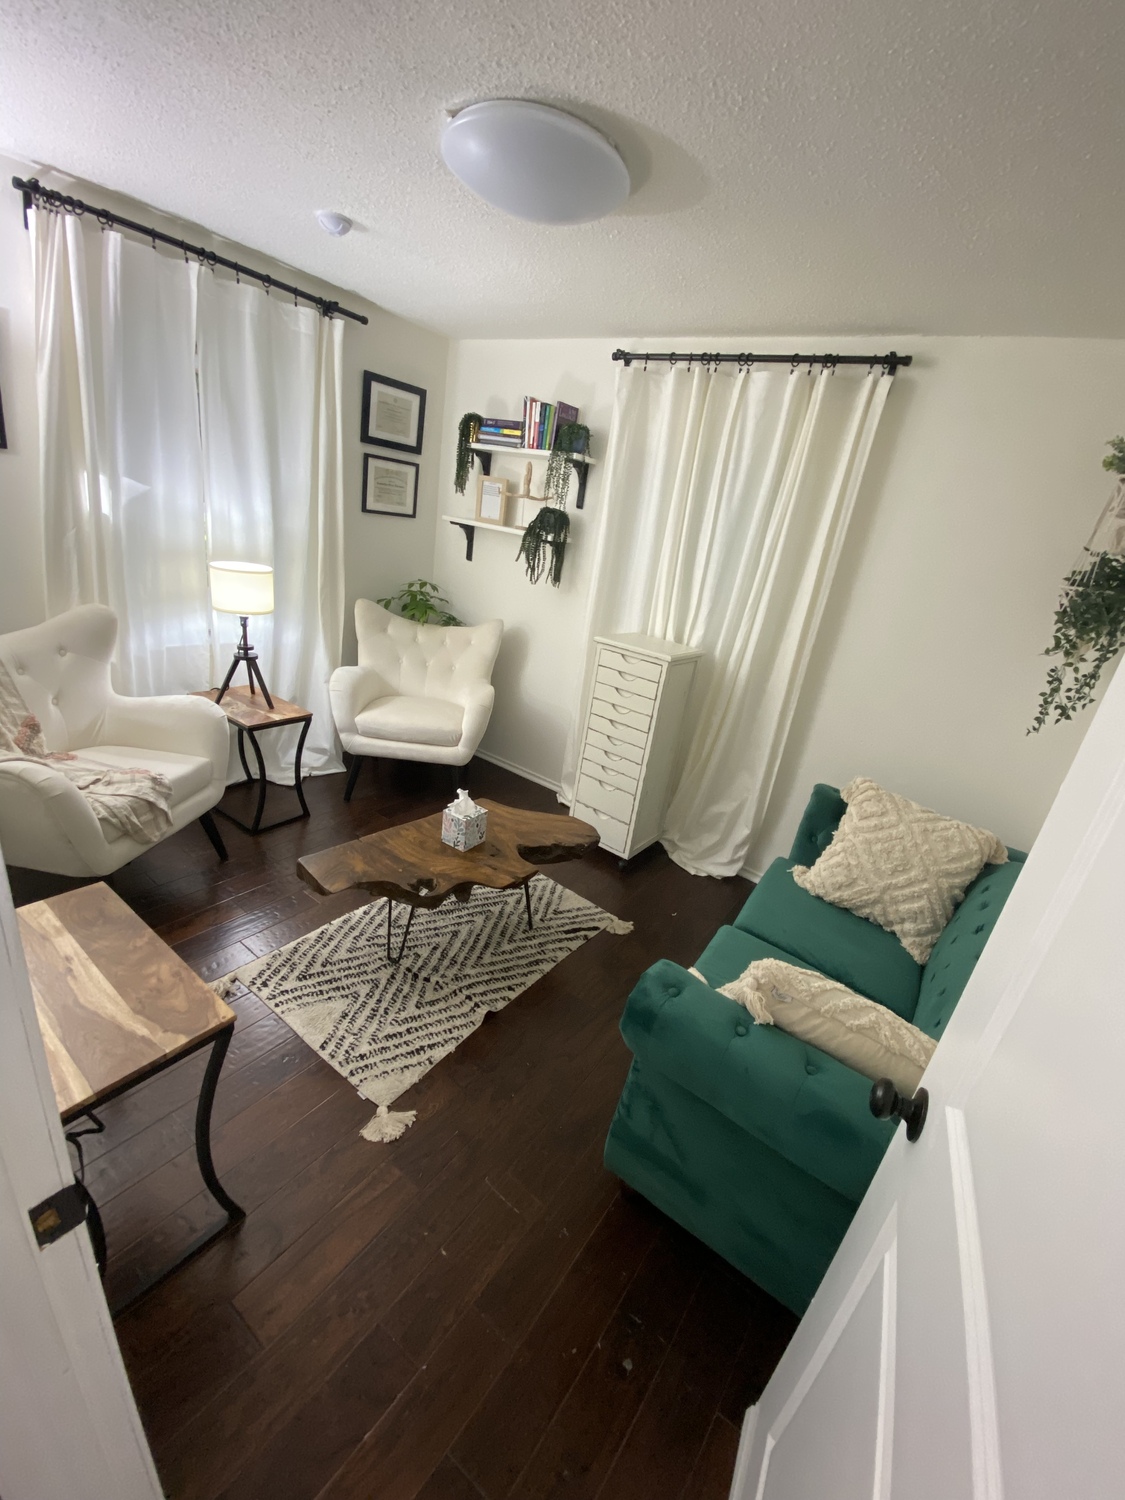 Gallery Photo of Kassandra’s Counseling room